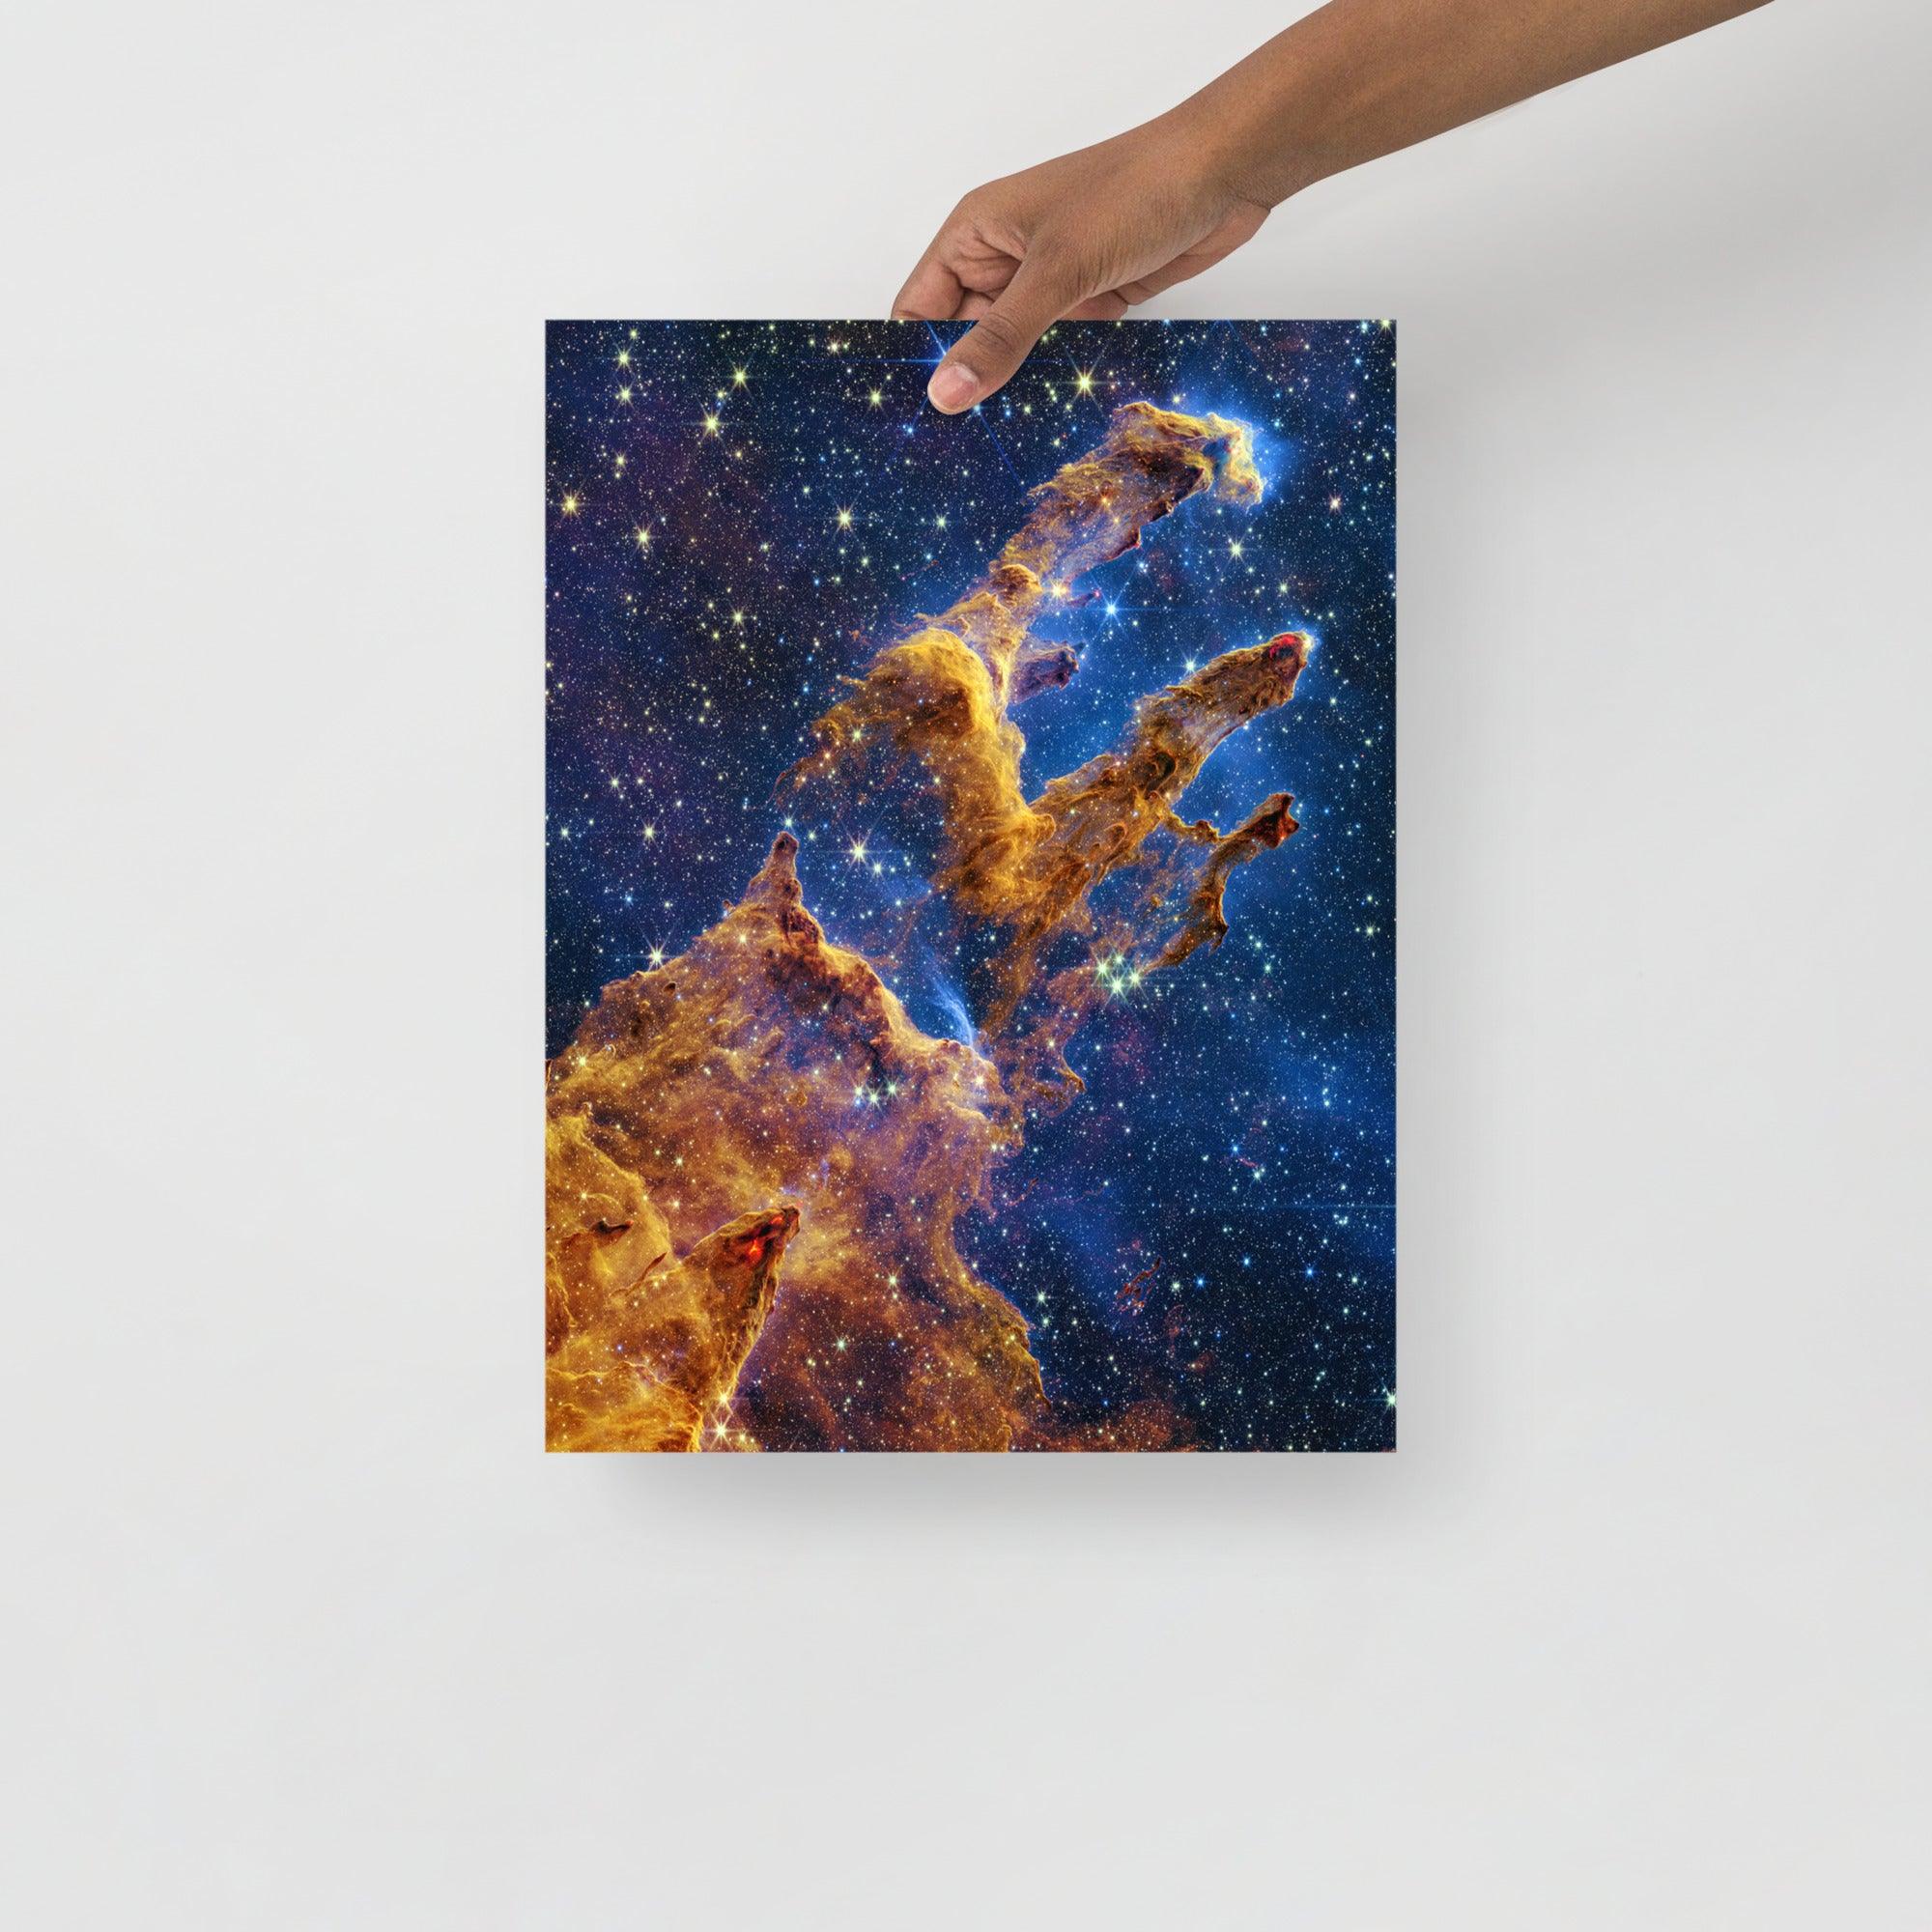 A Pillars of Creation by James Webb Telescope poster on a plain backdrop in size 12x16”.